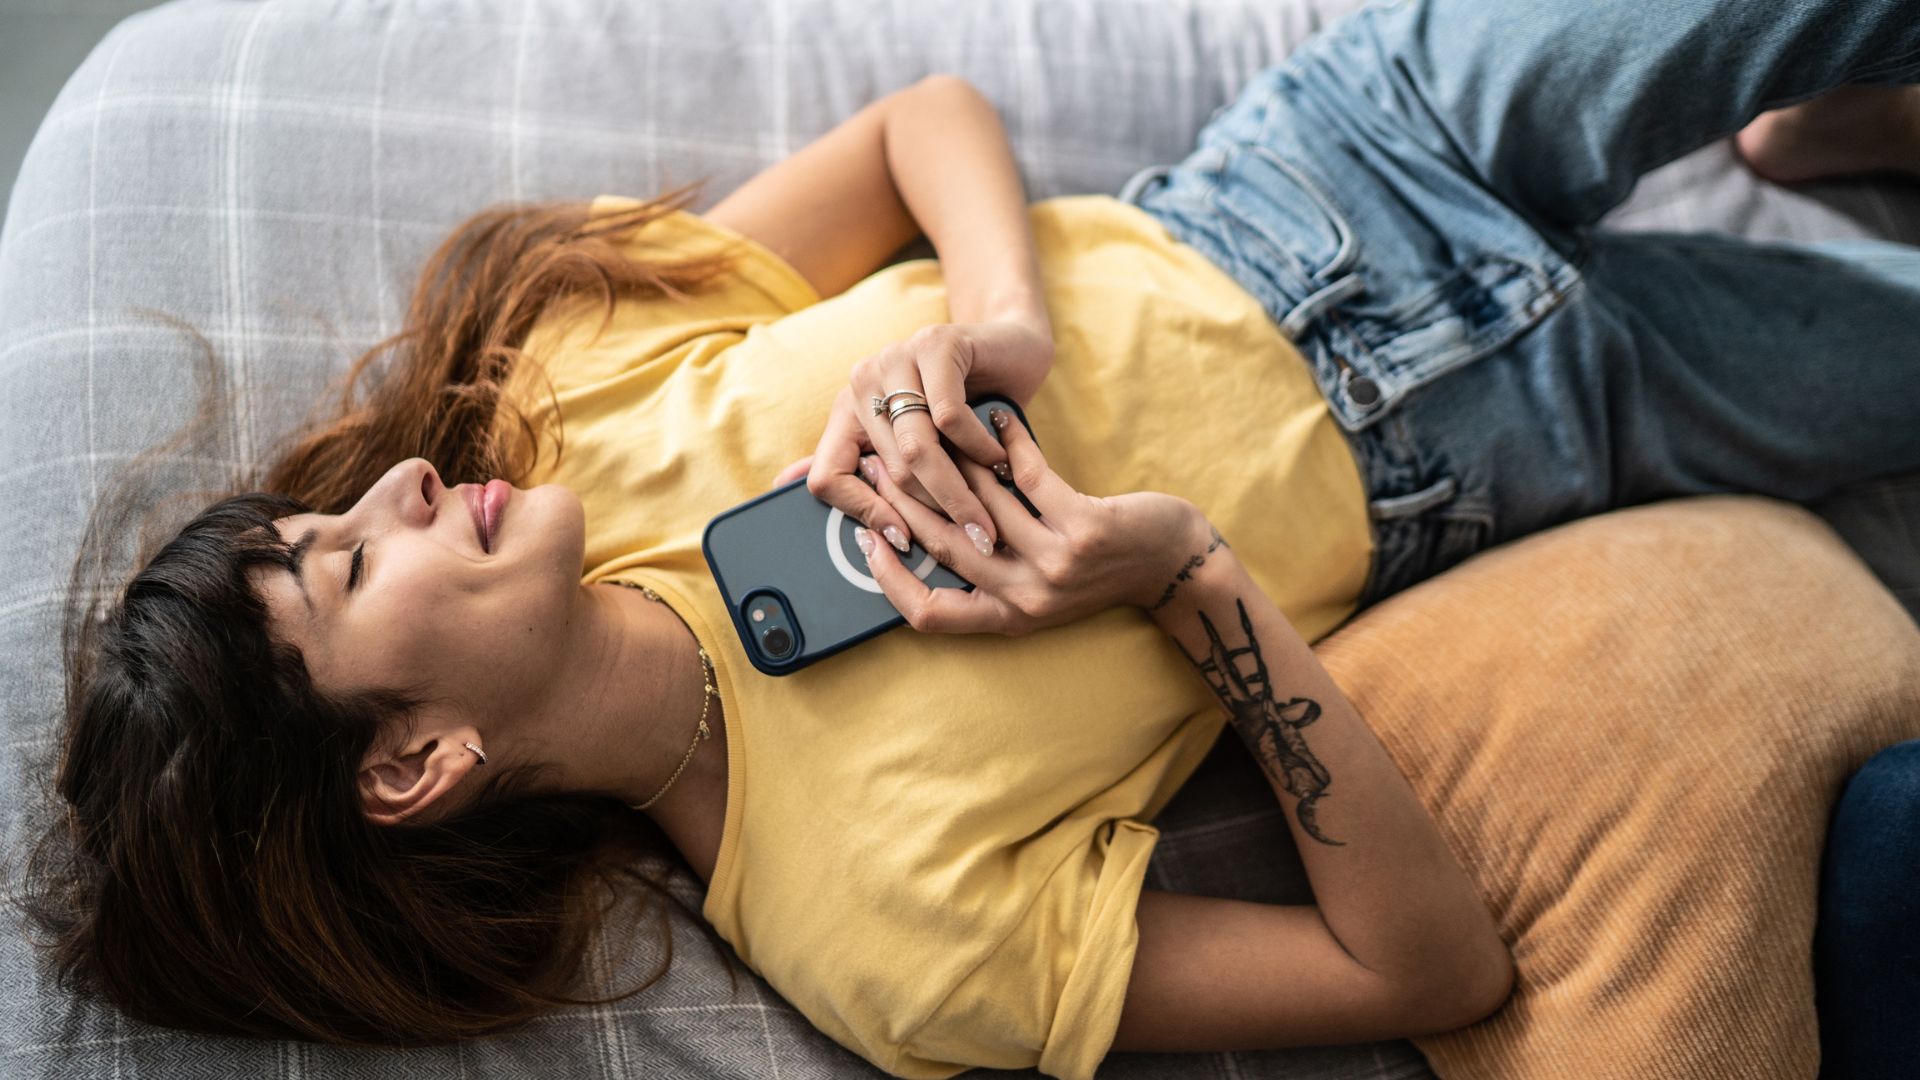 woman lies on bed with a phone held to her heart as she smiles